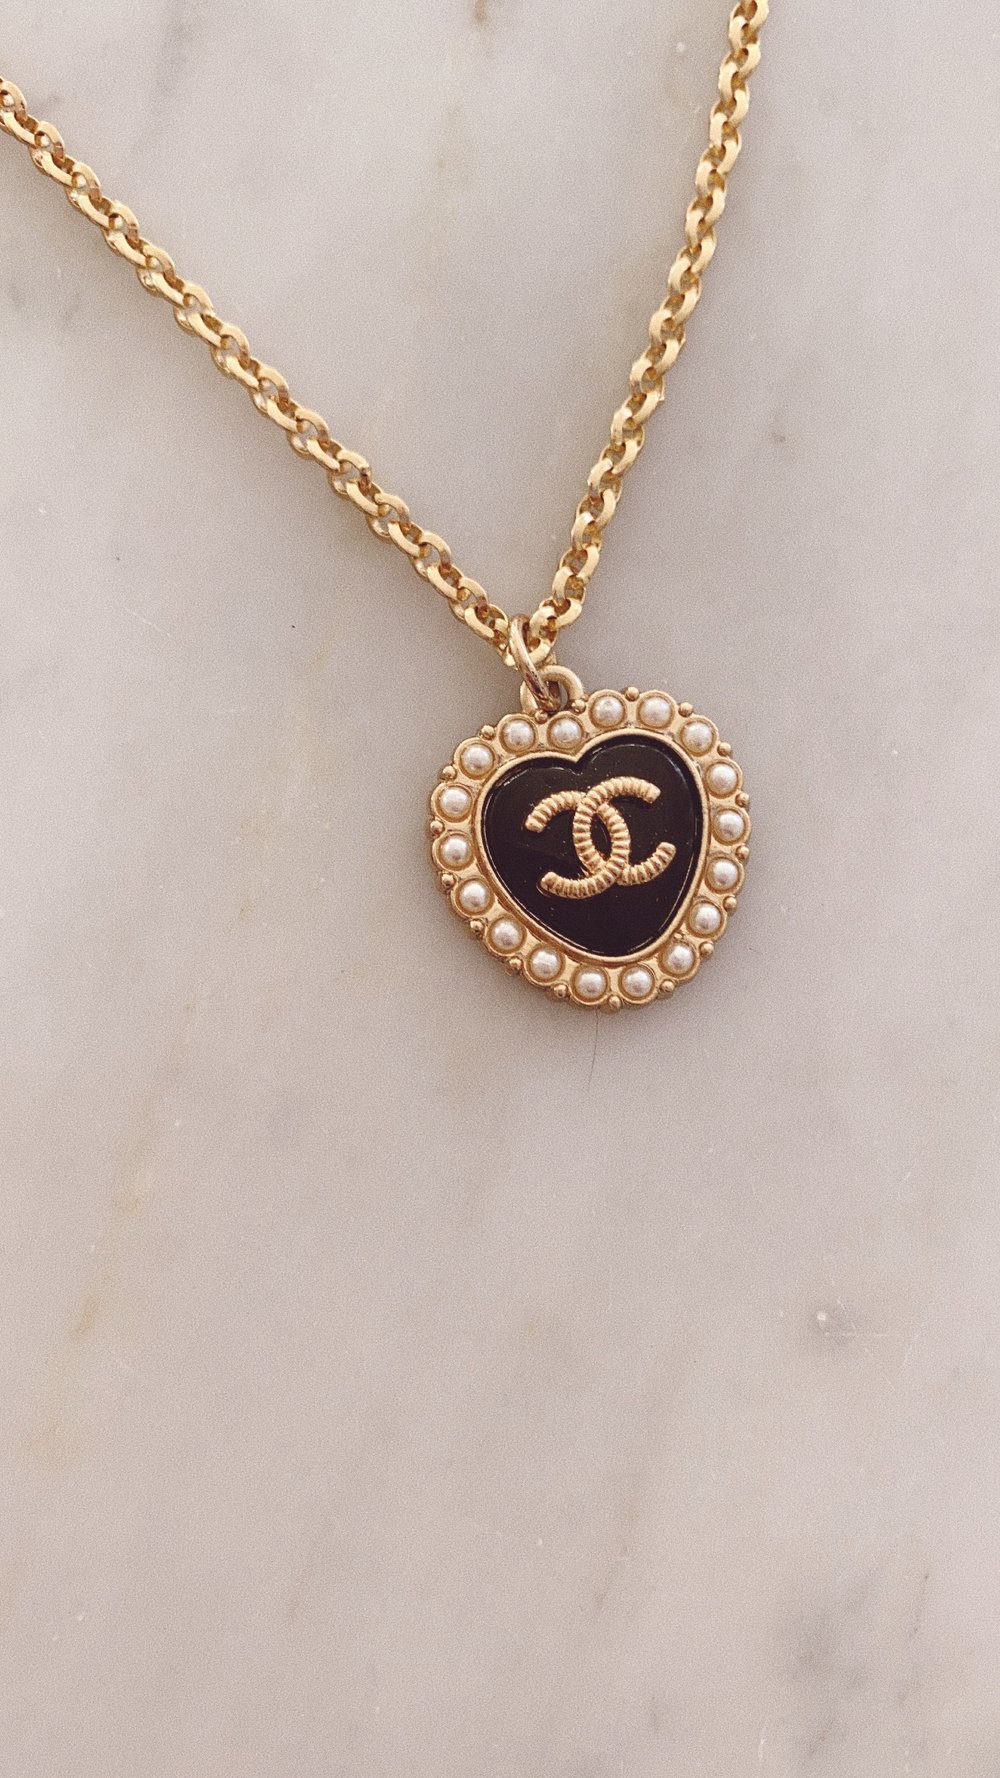 Chanel CC logo with heart necklace in light gold | Mrs1000shoes